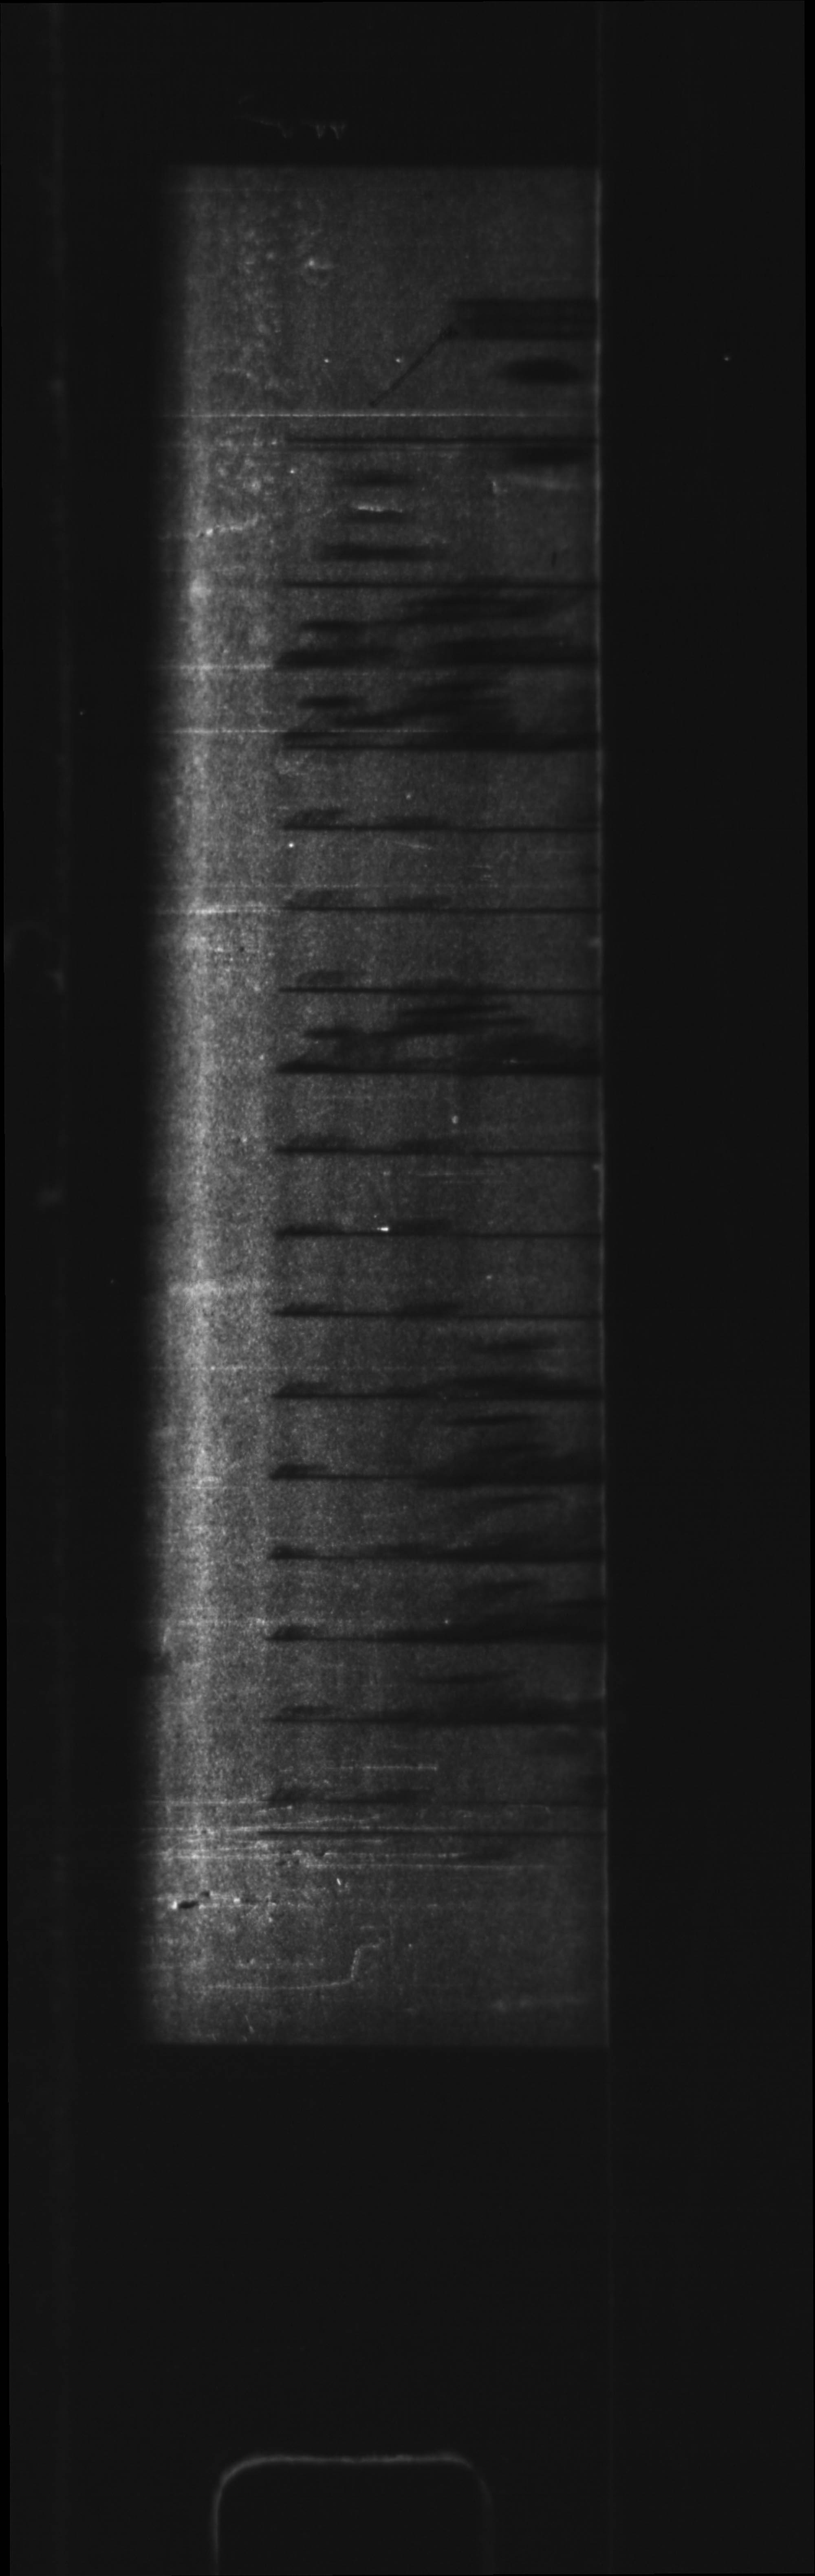 Title: Border Entry, 1908-1918 - Mikan Number: 134855 - Microform: t-5499